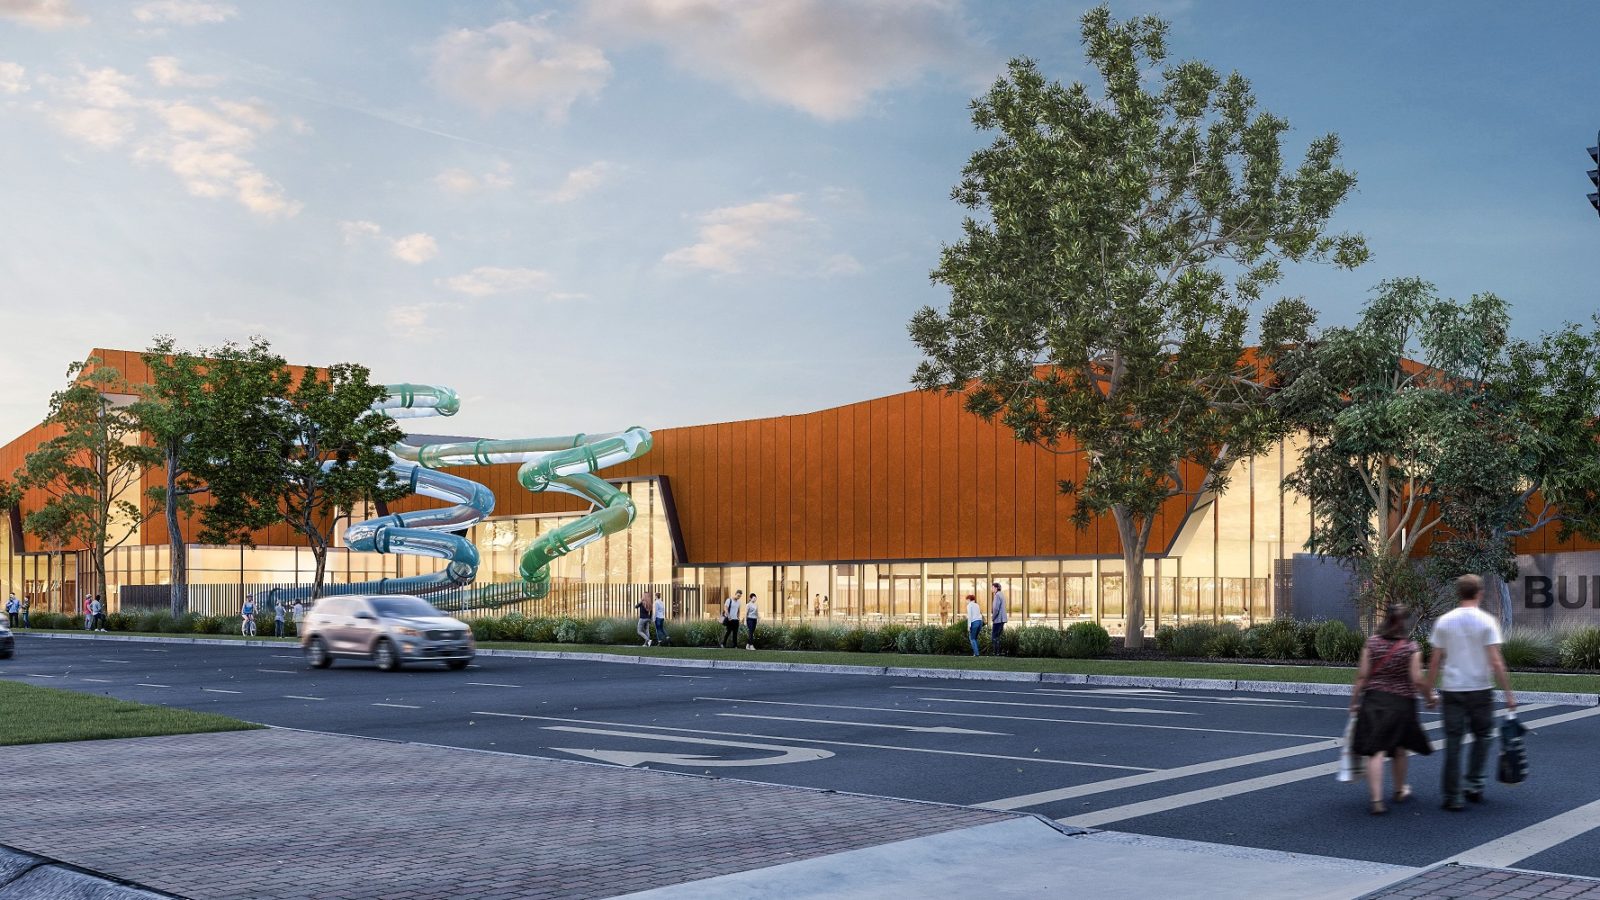 artist impression of new aquatic centre viewed from the main road with two large waterslides featuring on the building.